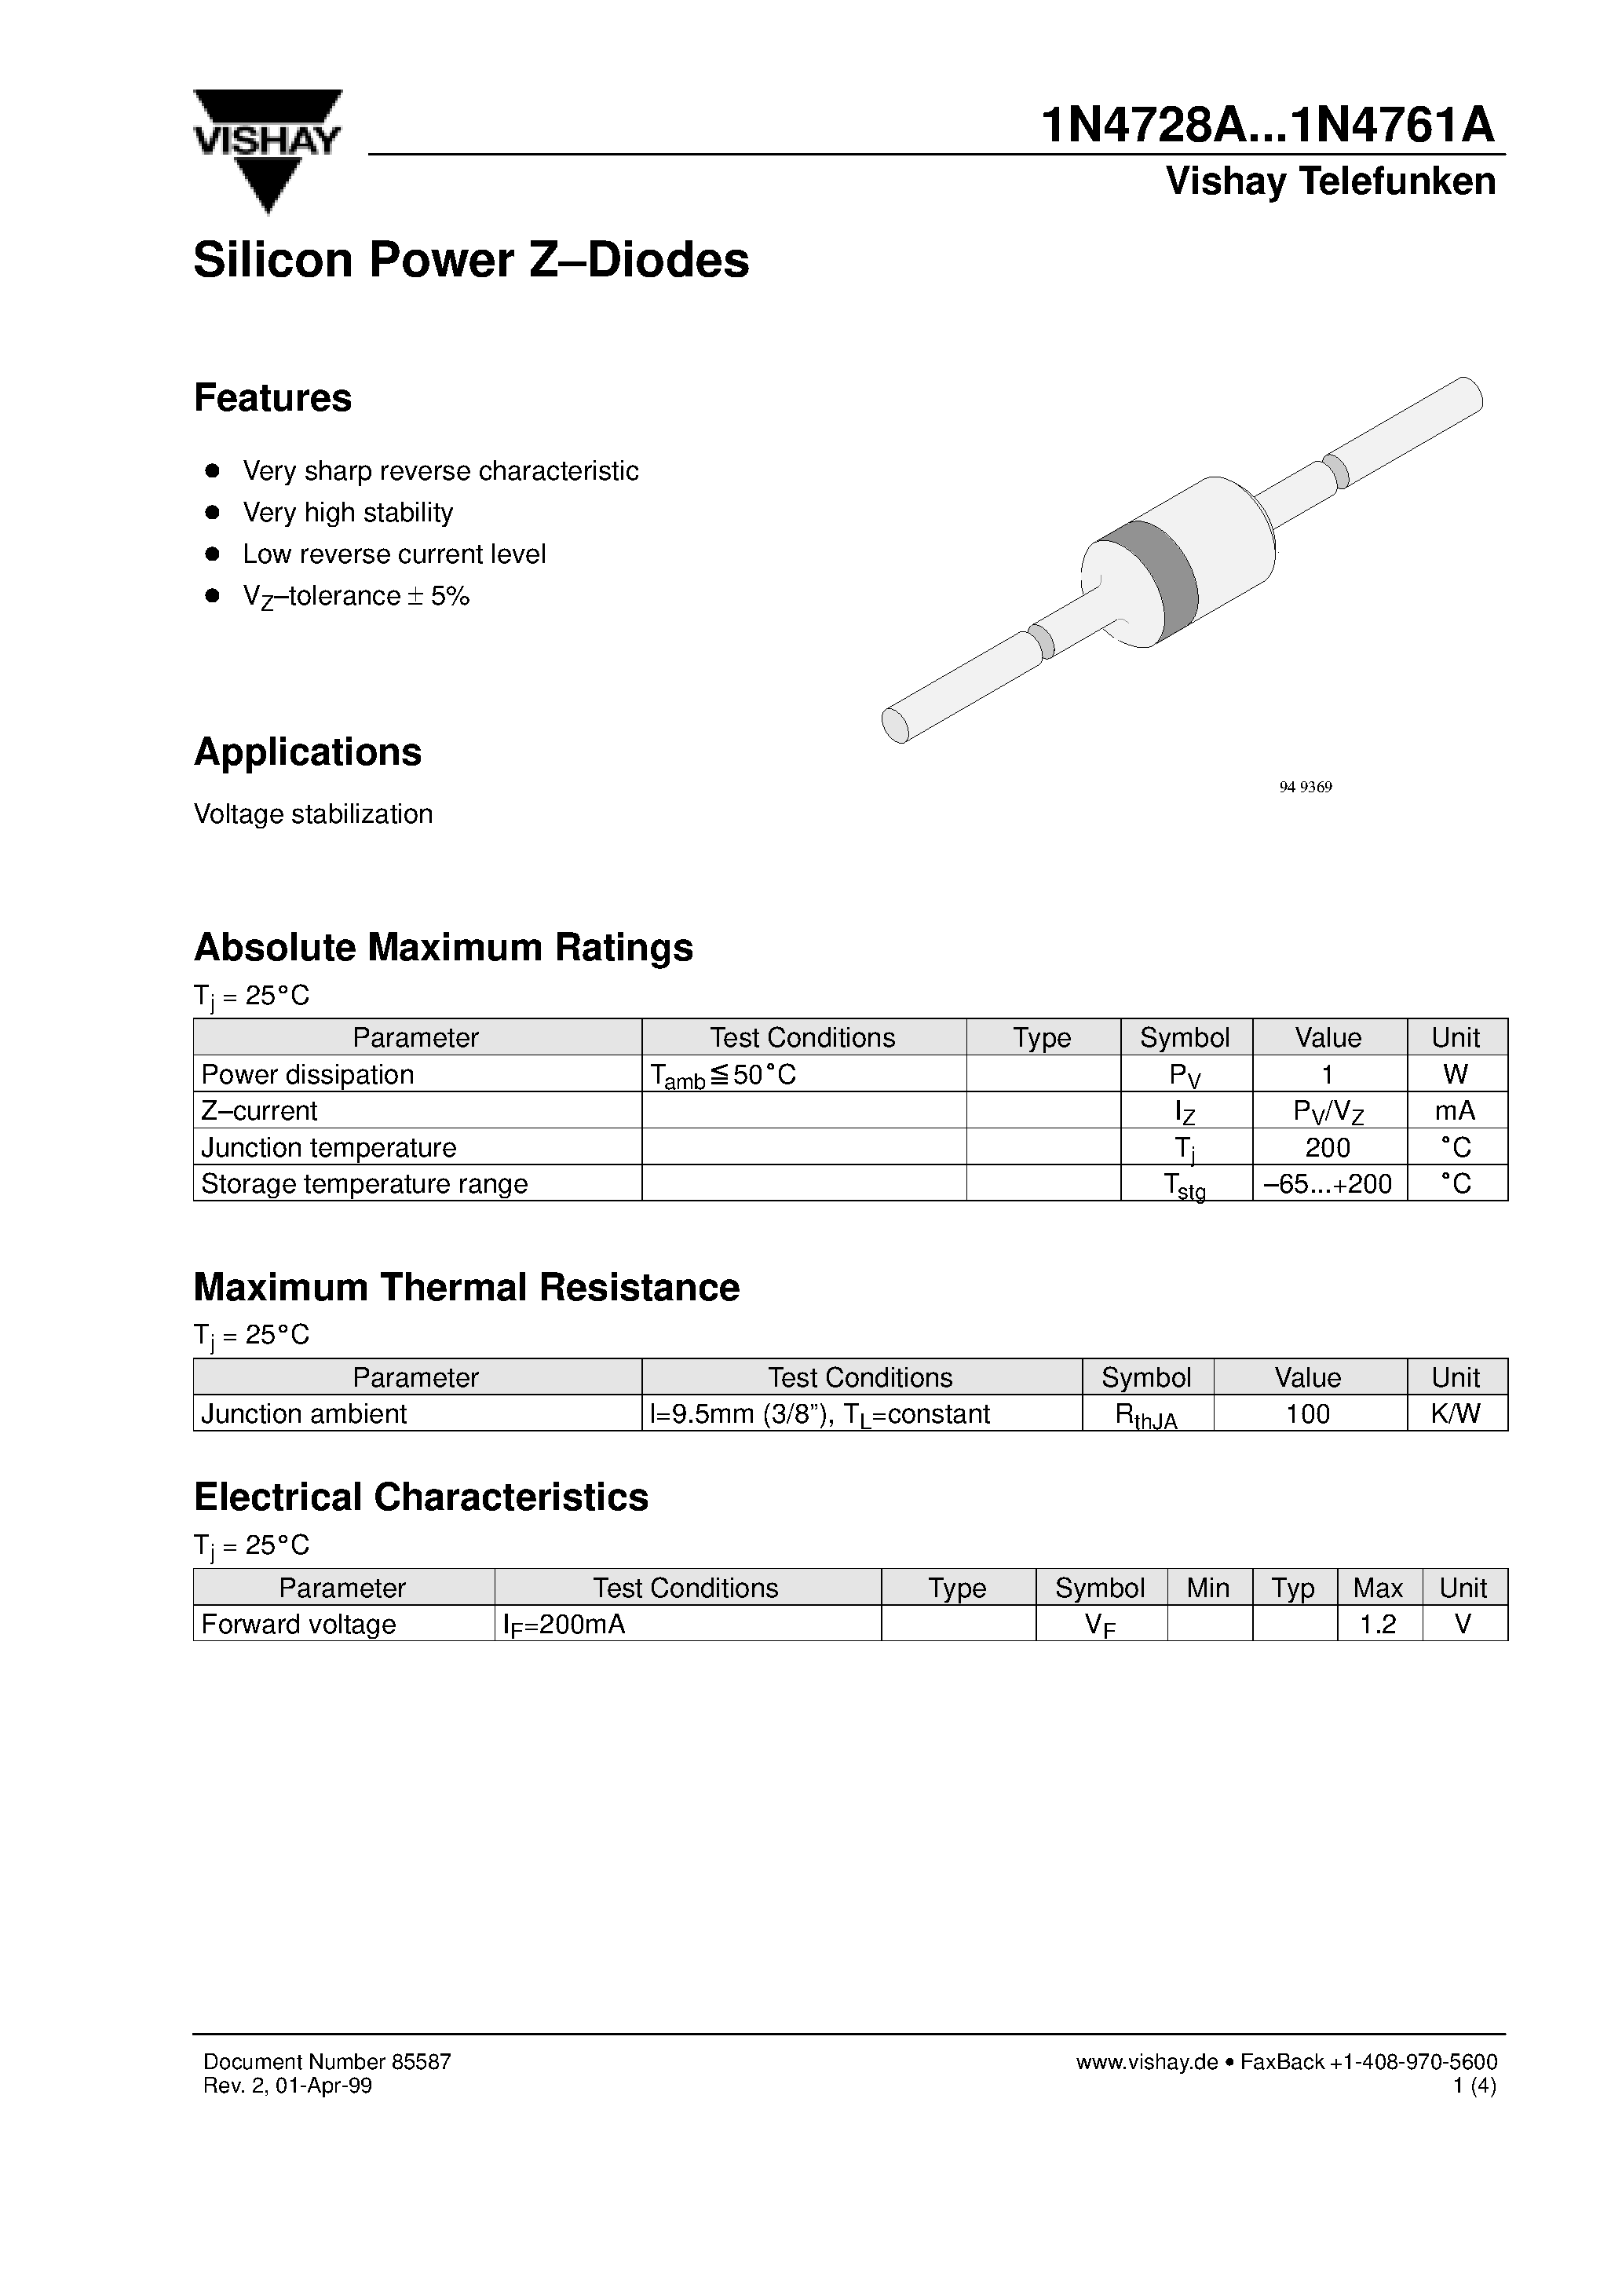 Даташит 1N4756A - Silicon Power Z-Diodes страница 1